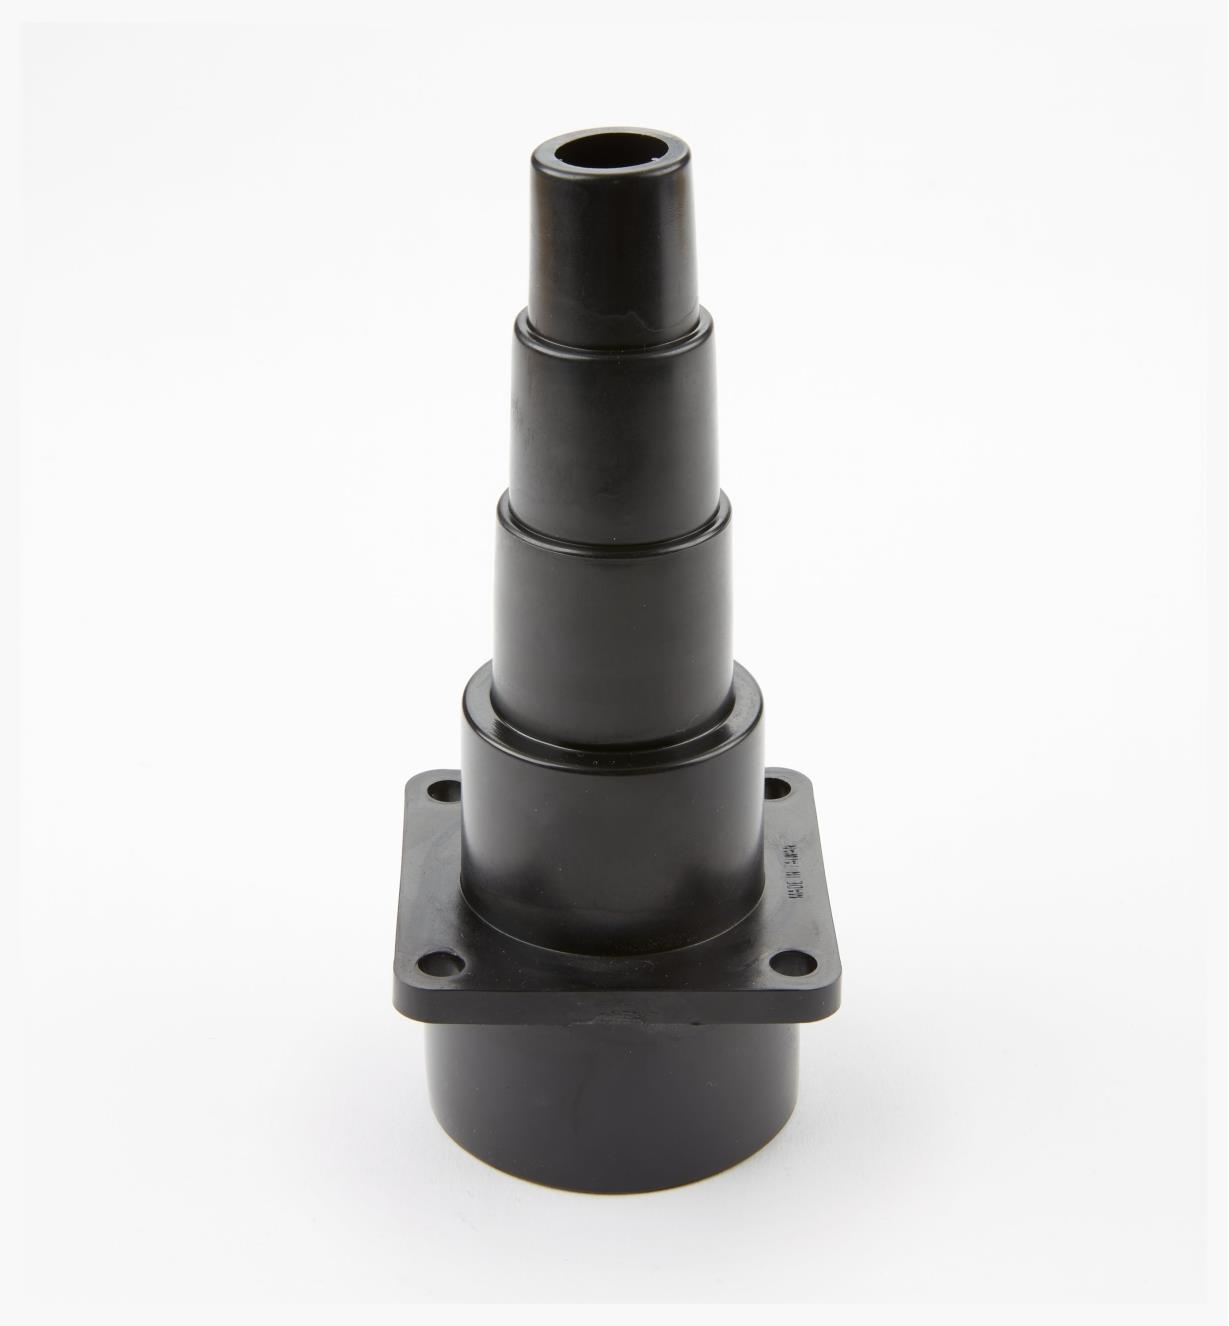 03J6099 - 2 1/2" Stepped Adapter, each